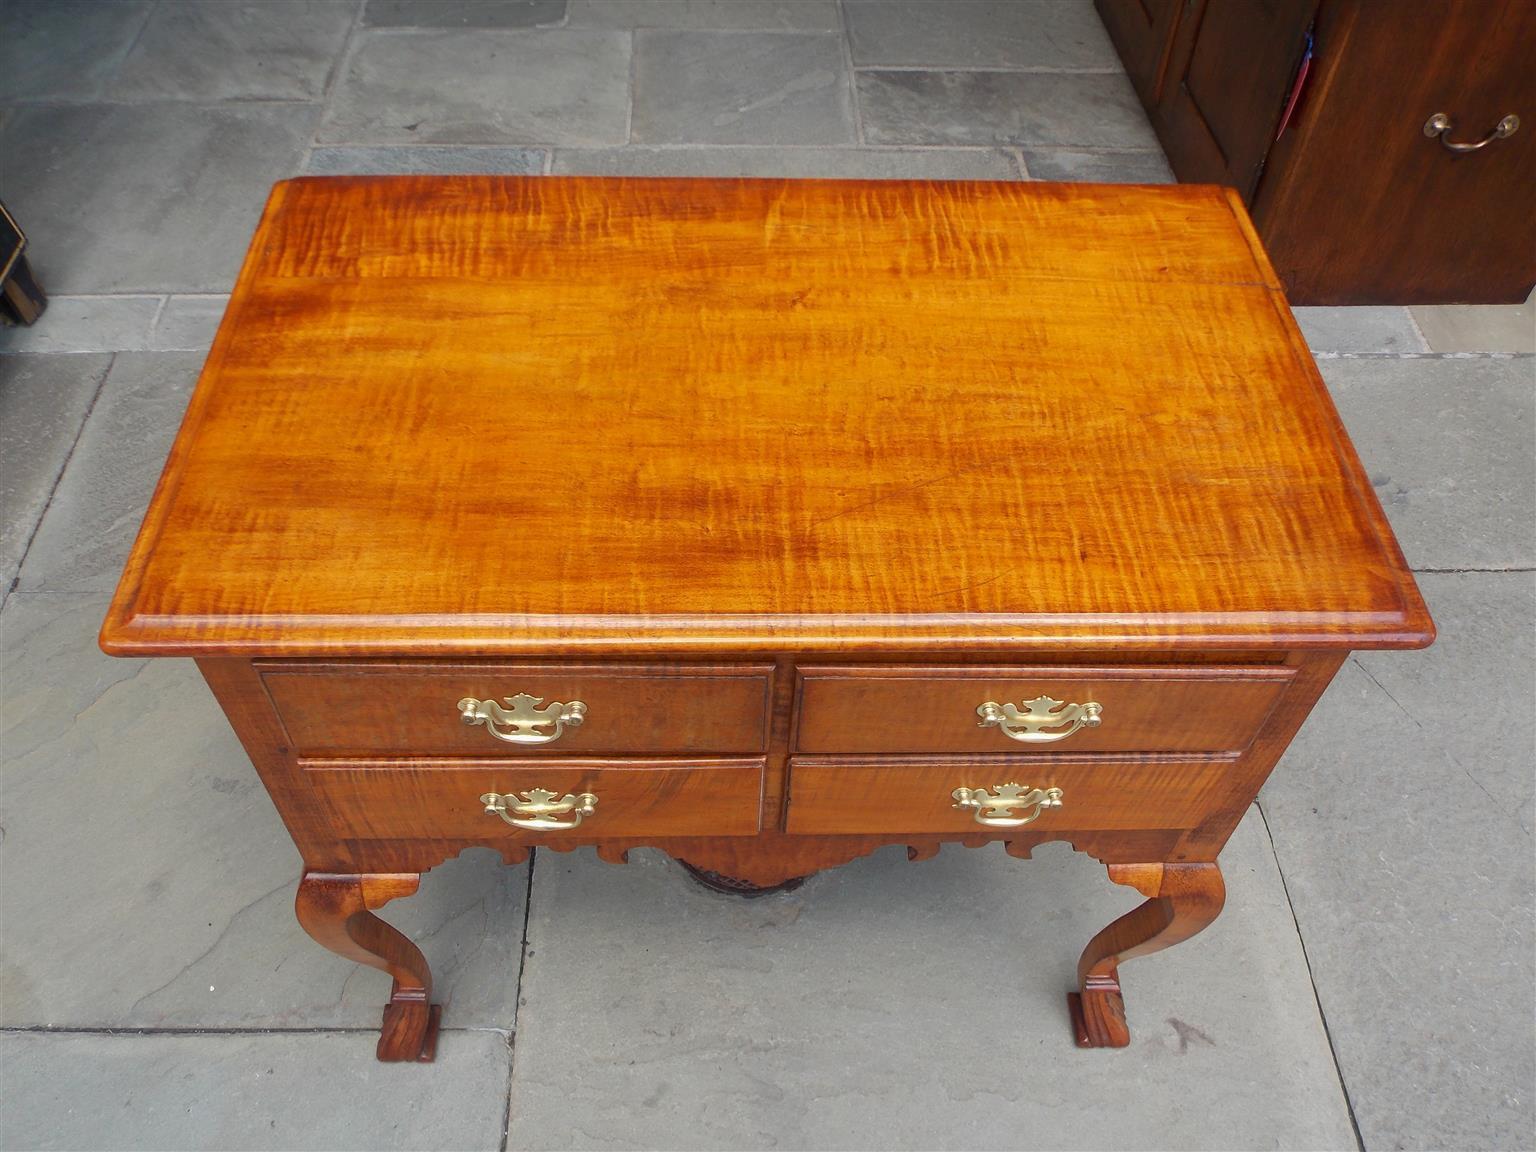 Hand-Carved American Queen Anne Curley Maple Four Drawer Lowboy with Spanish Feet. C. 1750